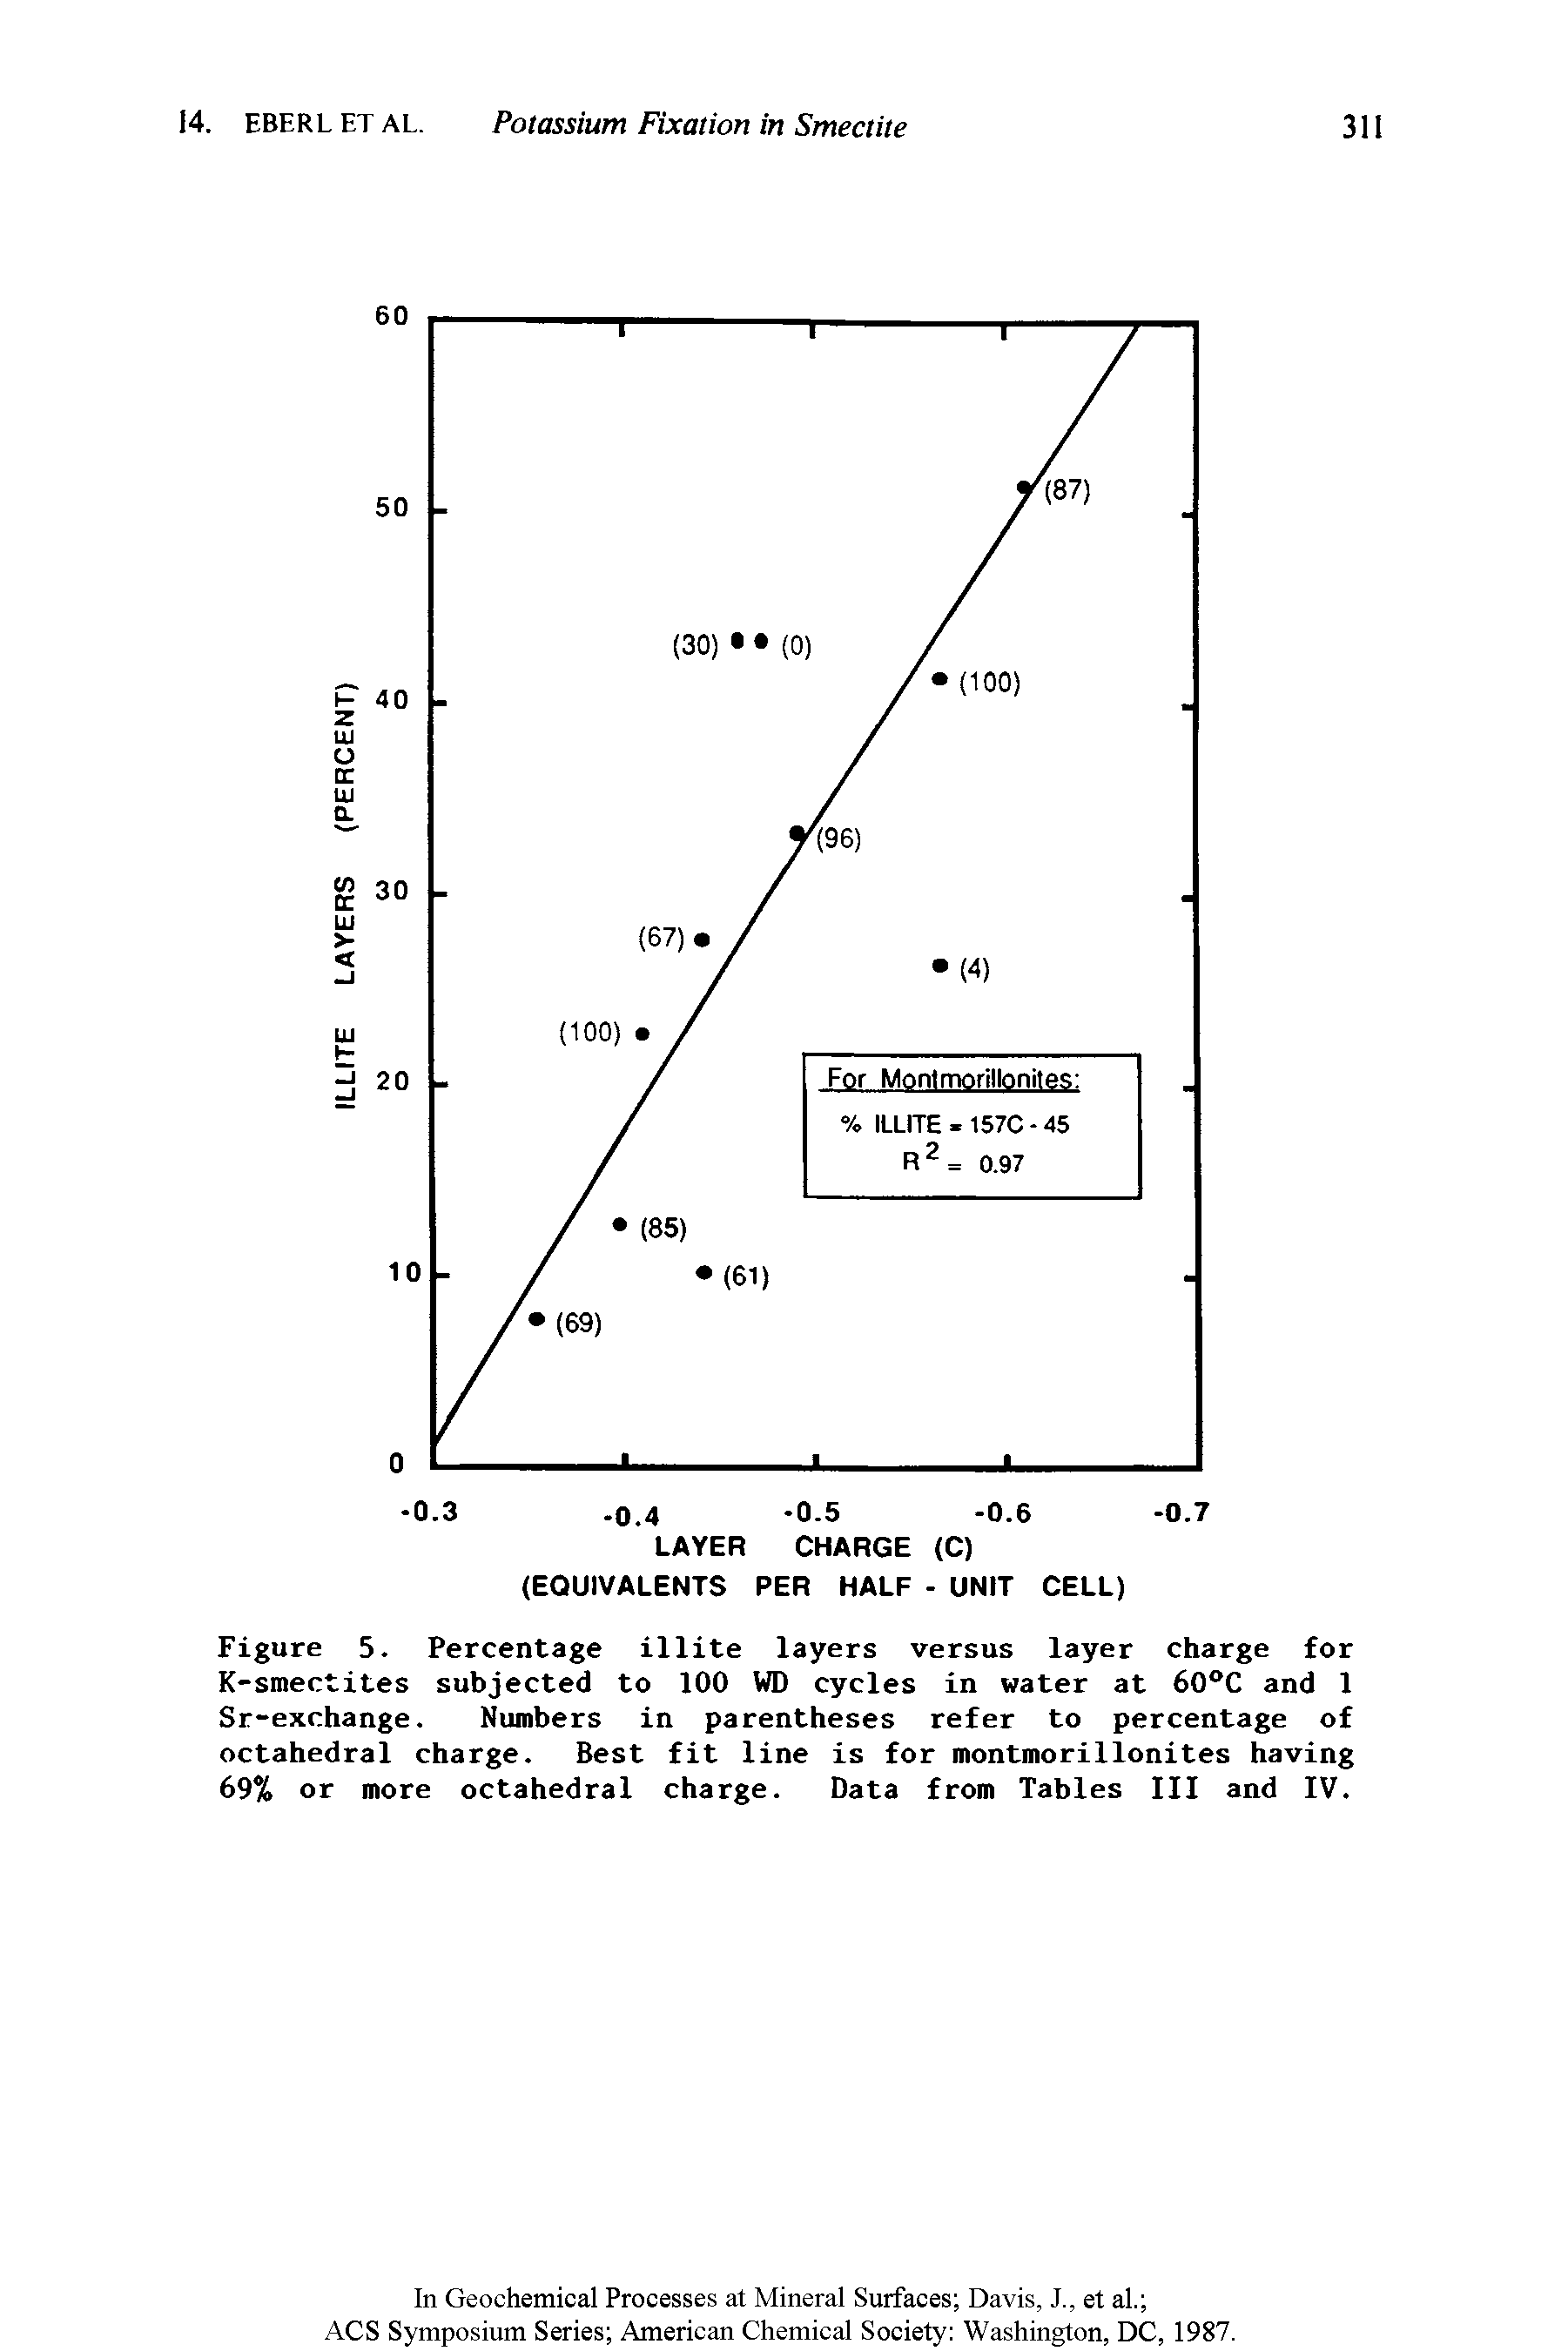 Figure 5. Percentage illite layers versus layer charge for K-smectites subjected to 100 WD cycles in water at 60°C and 1 Sr-exchange. Numbers in parentheses refer to percentage of octahedral charge. Best fit line is for montmorillonites having 69% or more octahedral charge. Data from Tables III and IV.